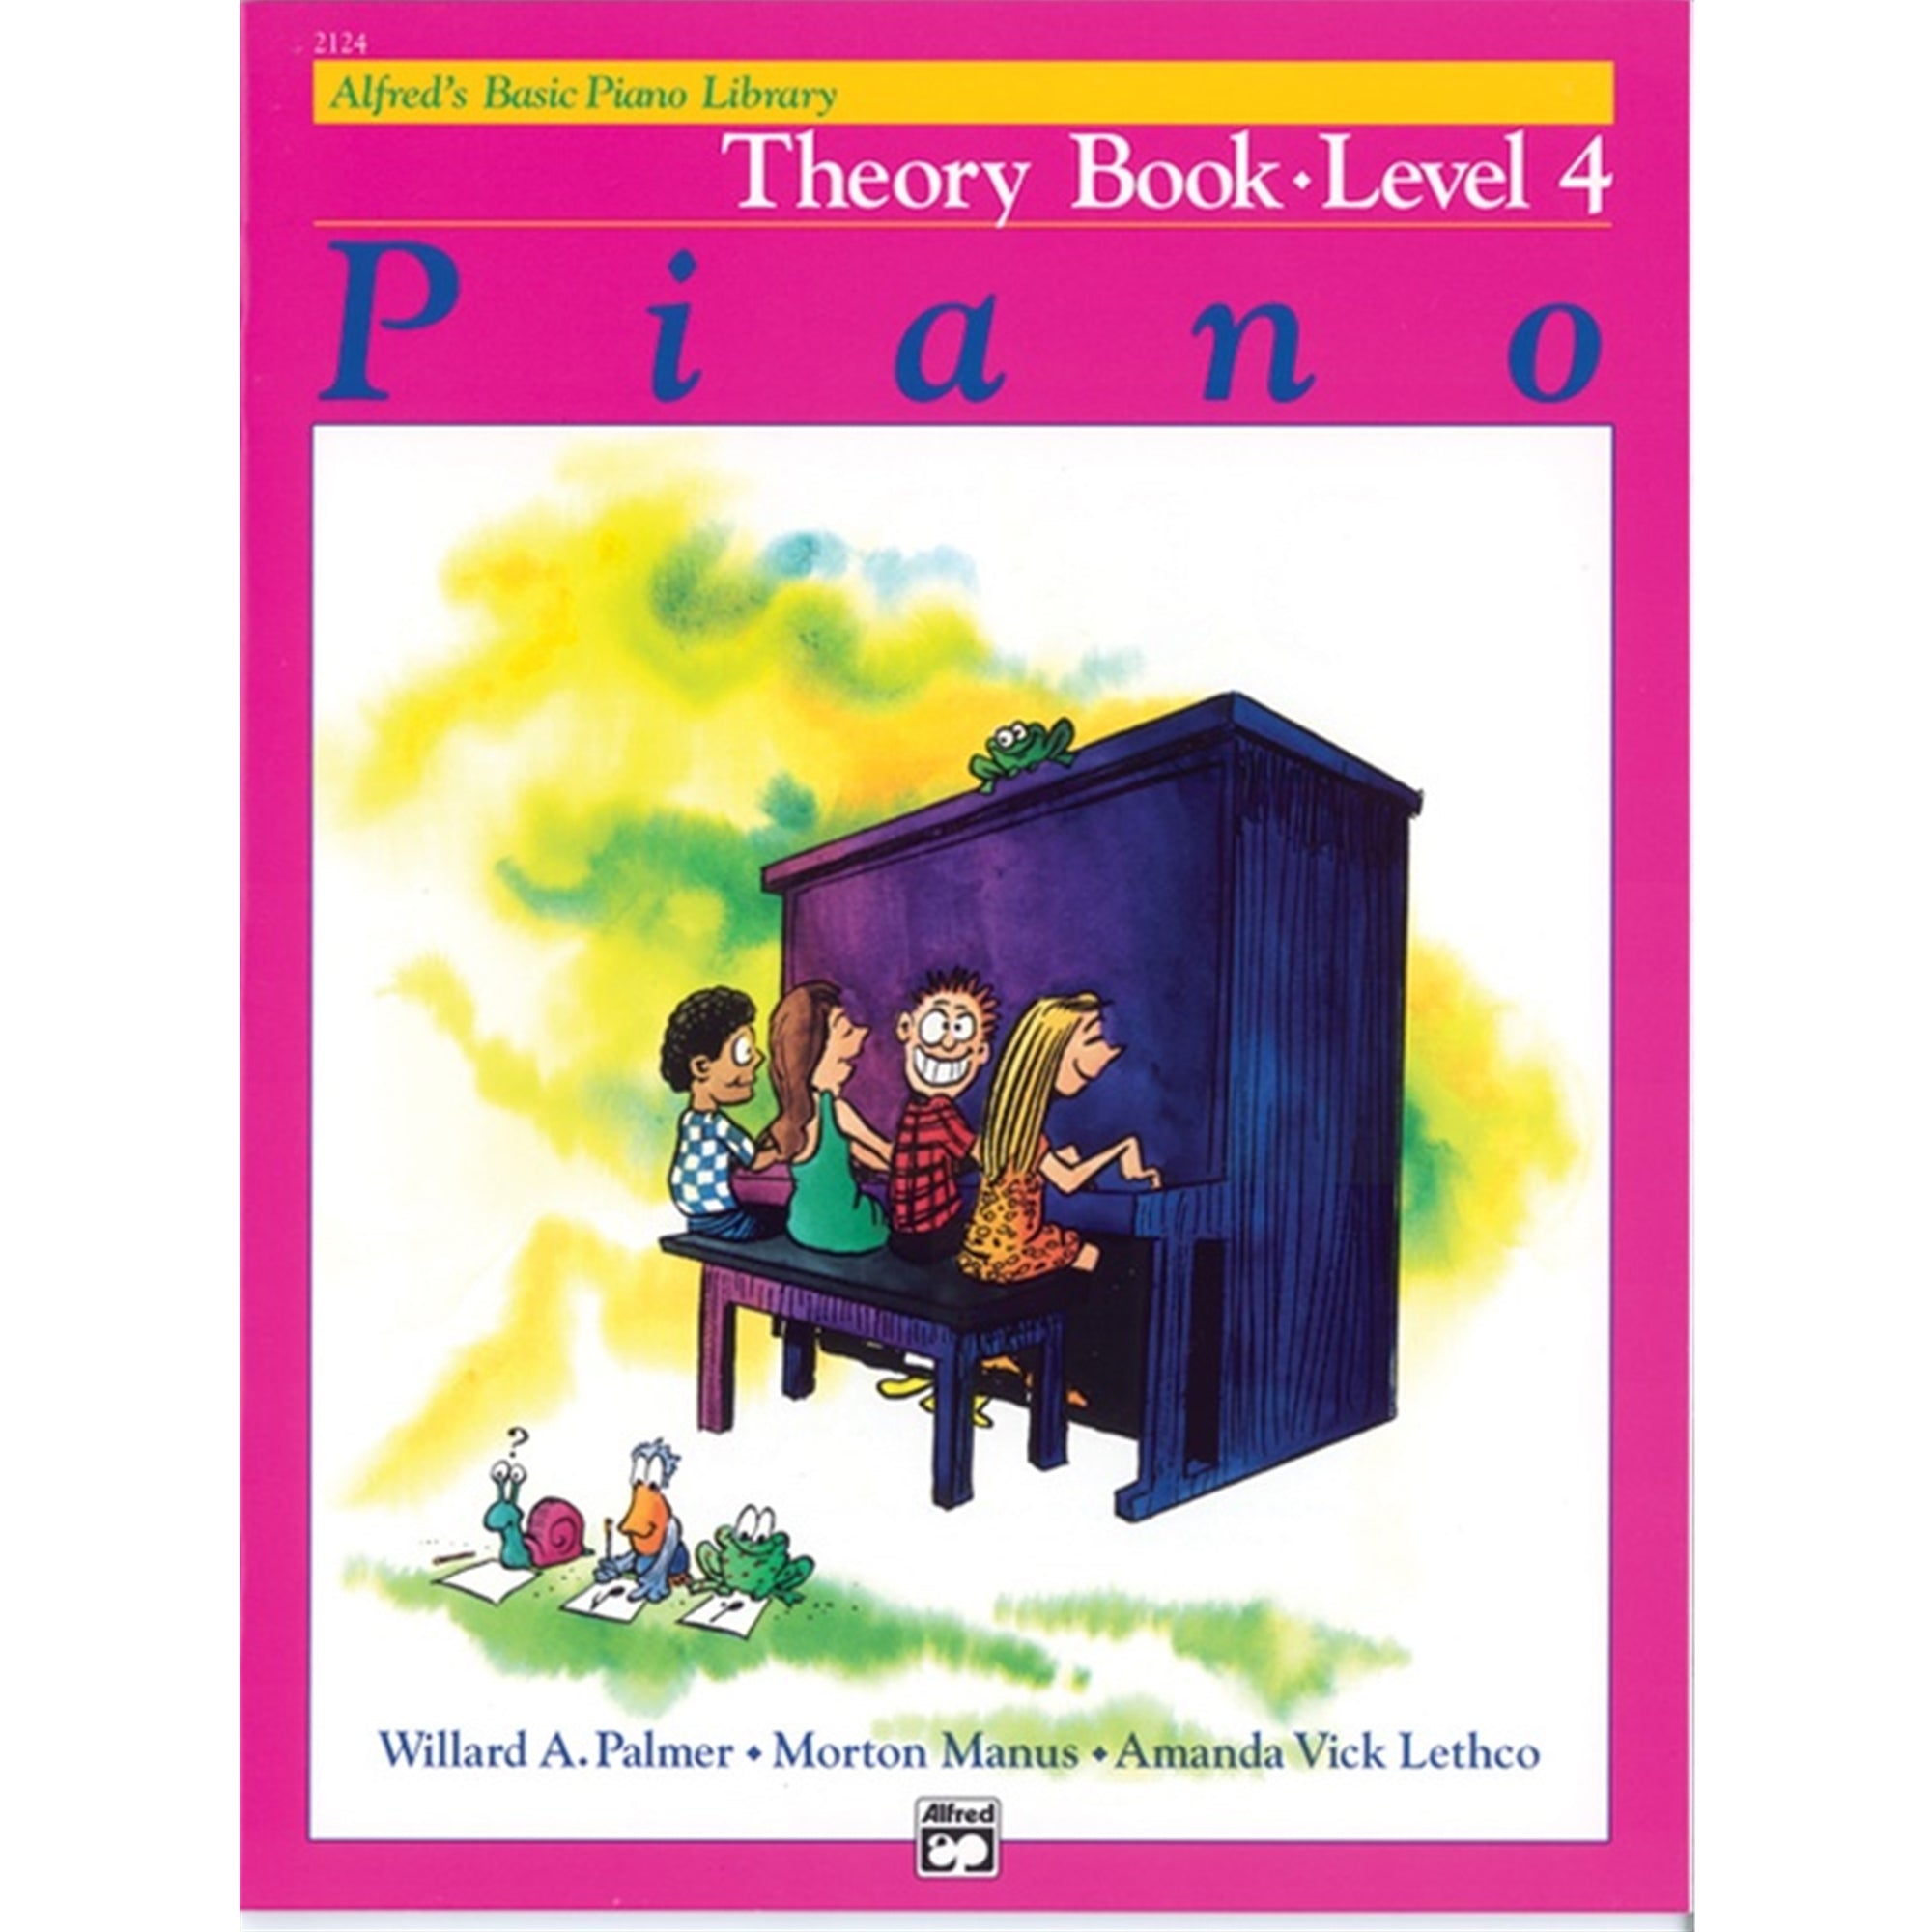 ALFRED 2124 Alfred's Basic Piano Course: Theory Book 4 [Piano]